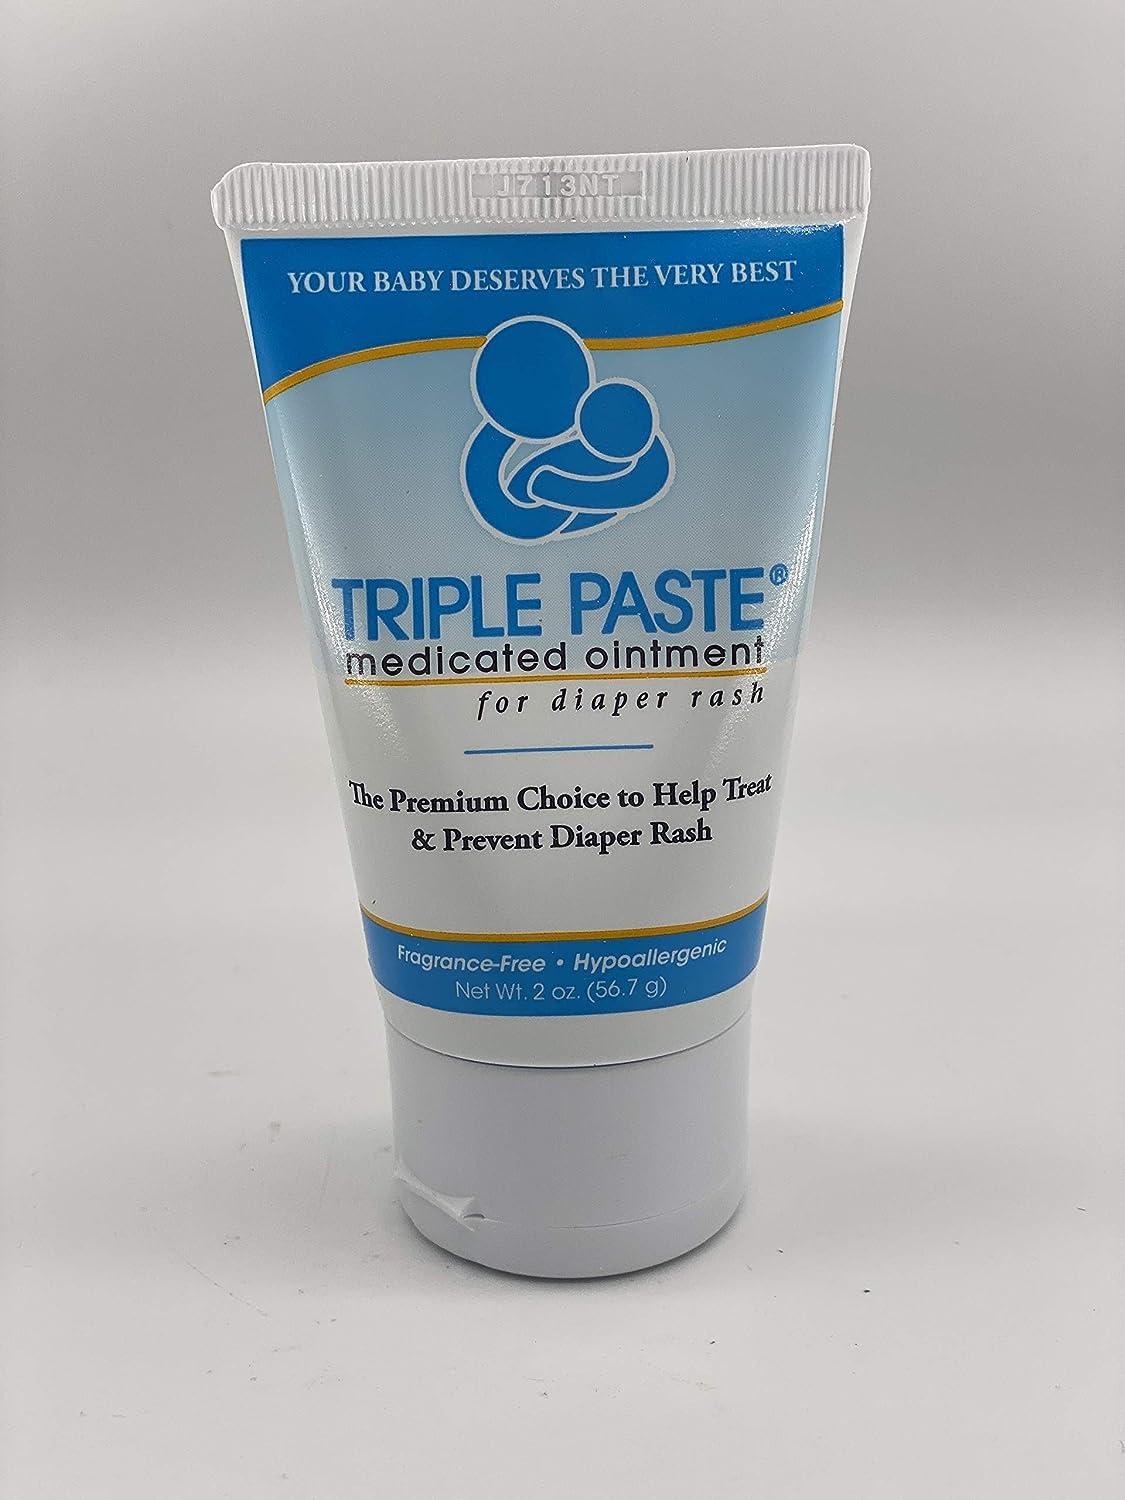 Summers Laboratories Inc Triple Paste Medicated Ointment for